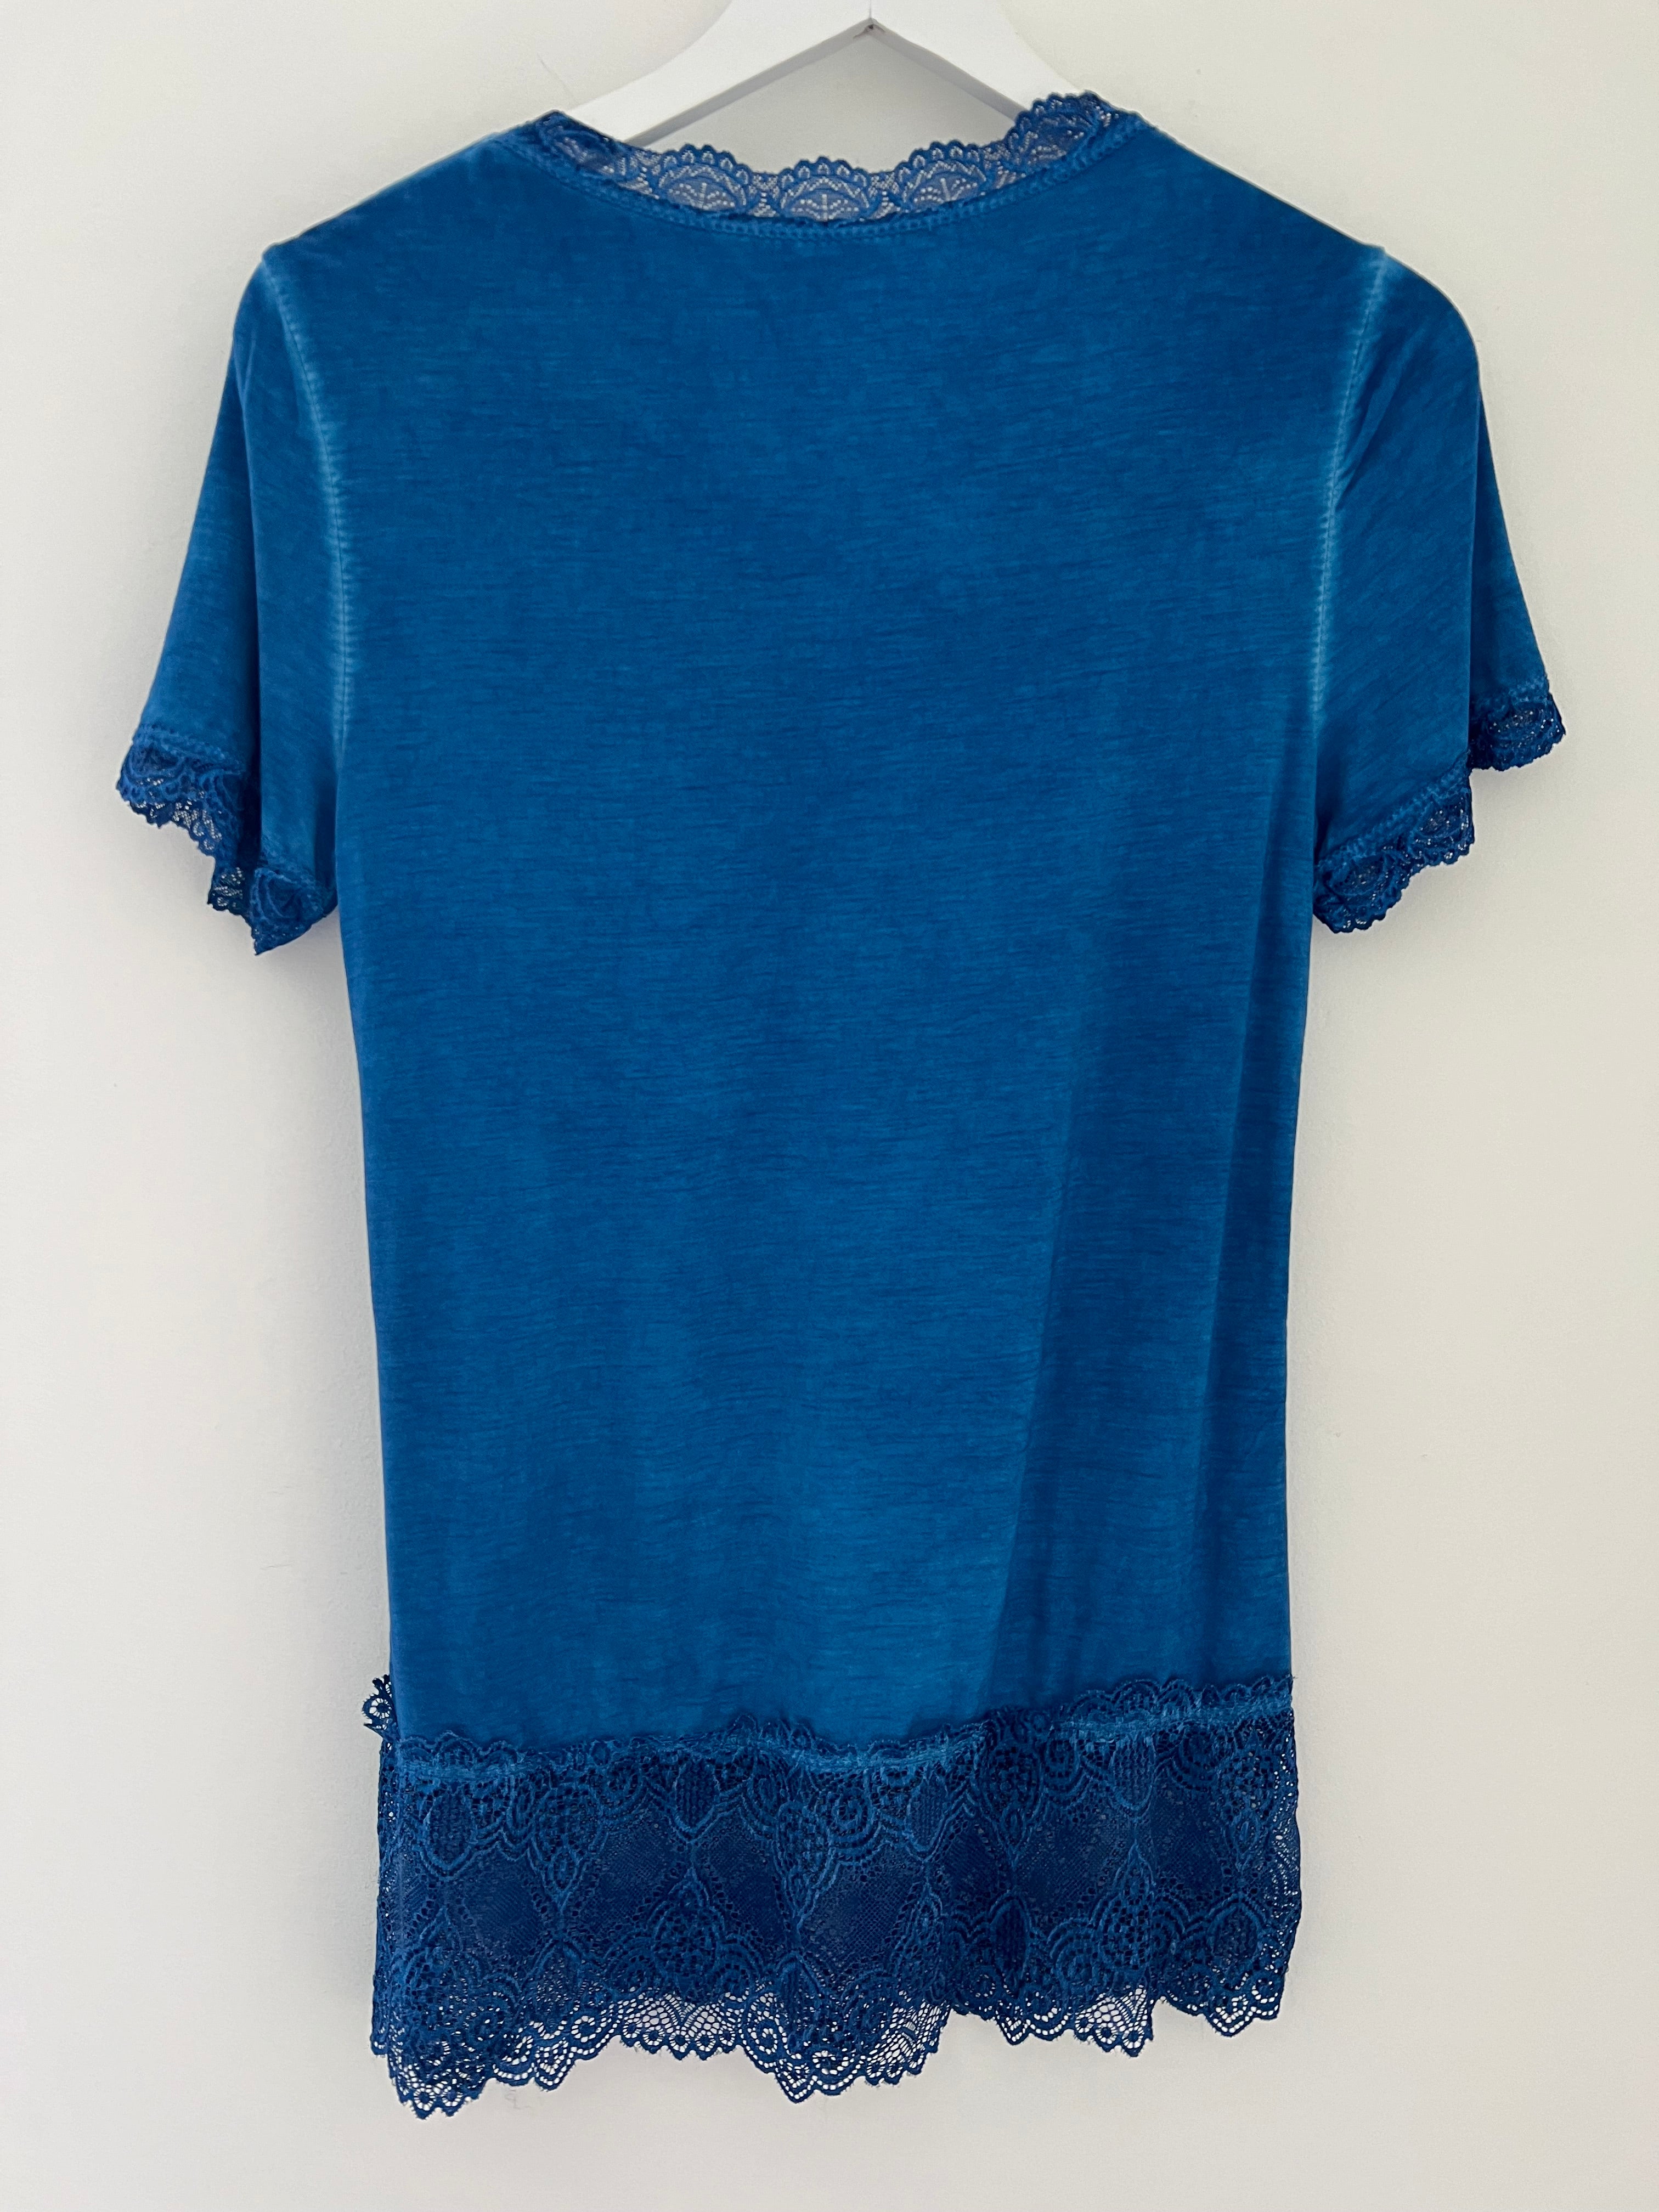 Short Sleeve Luxe Base Top in Blue